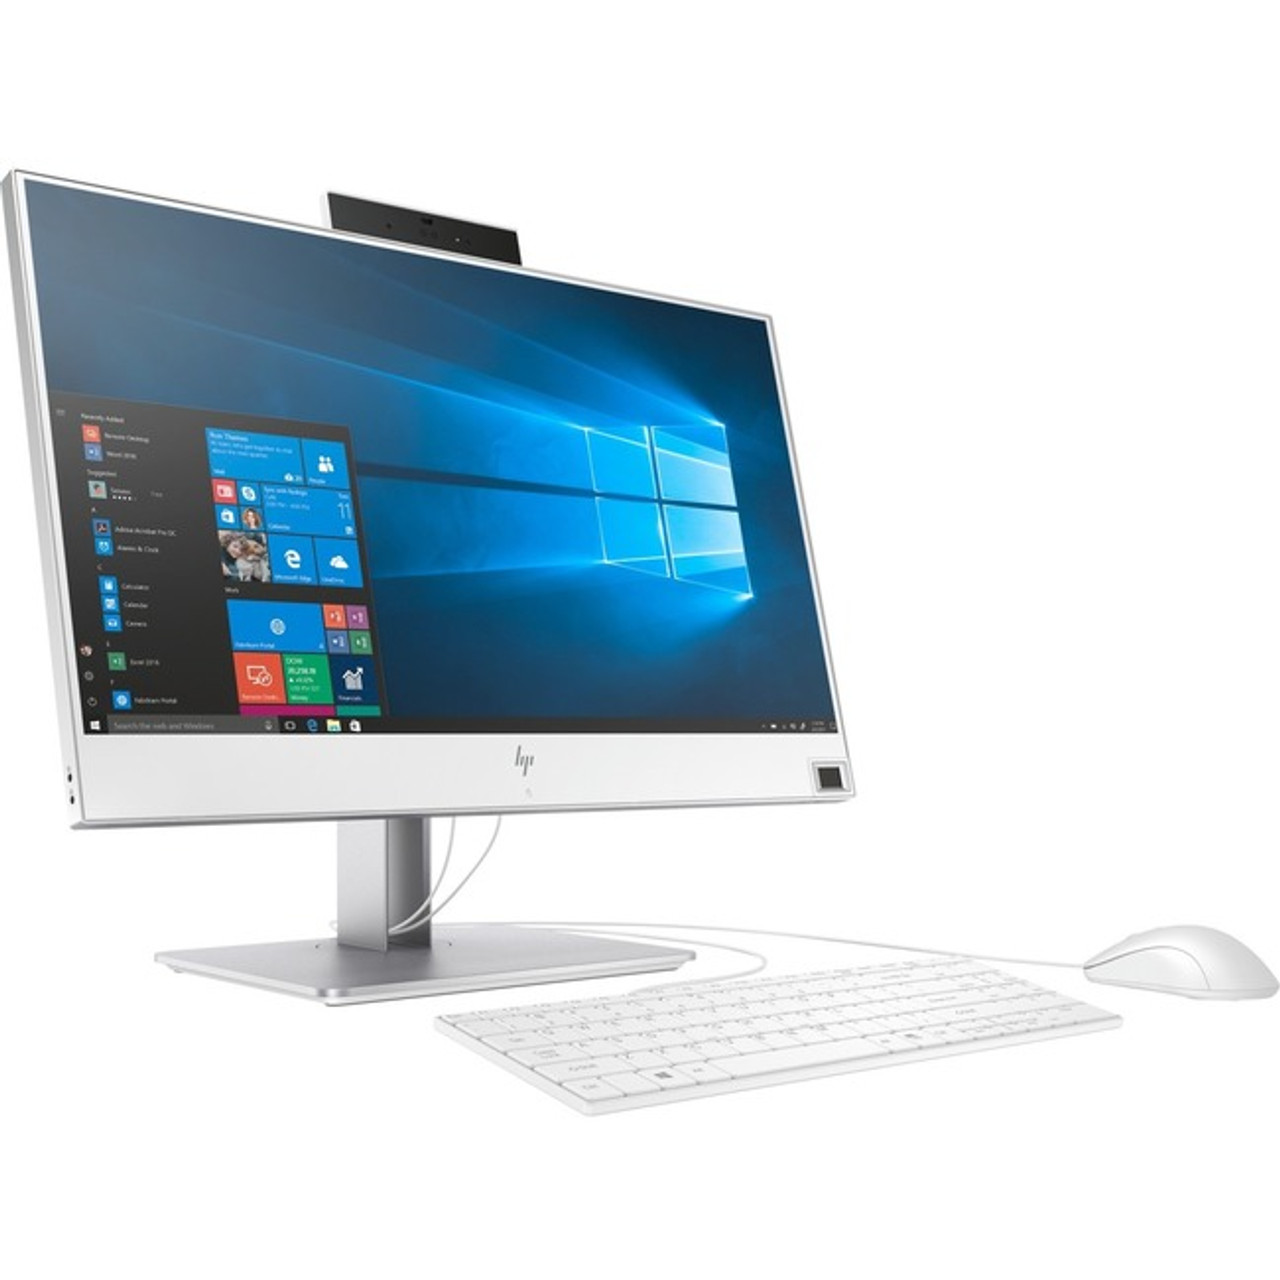 EliteOne 800 G4 23.8-inch Touch GPU All-in-One PC